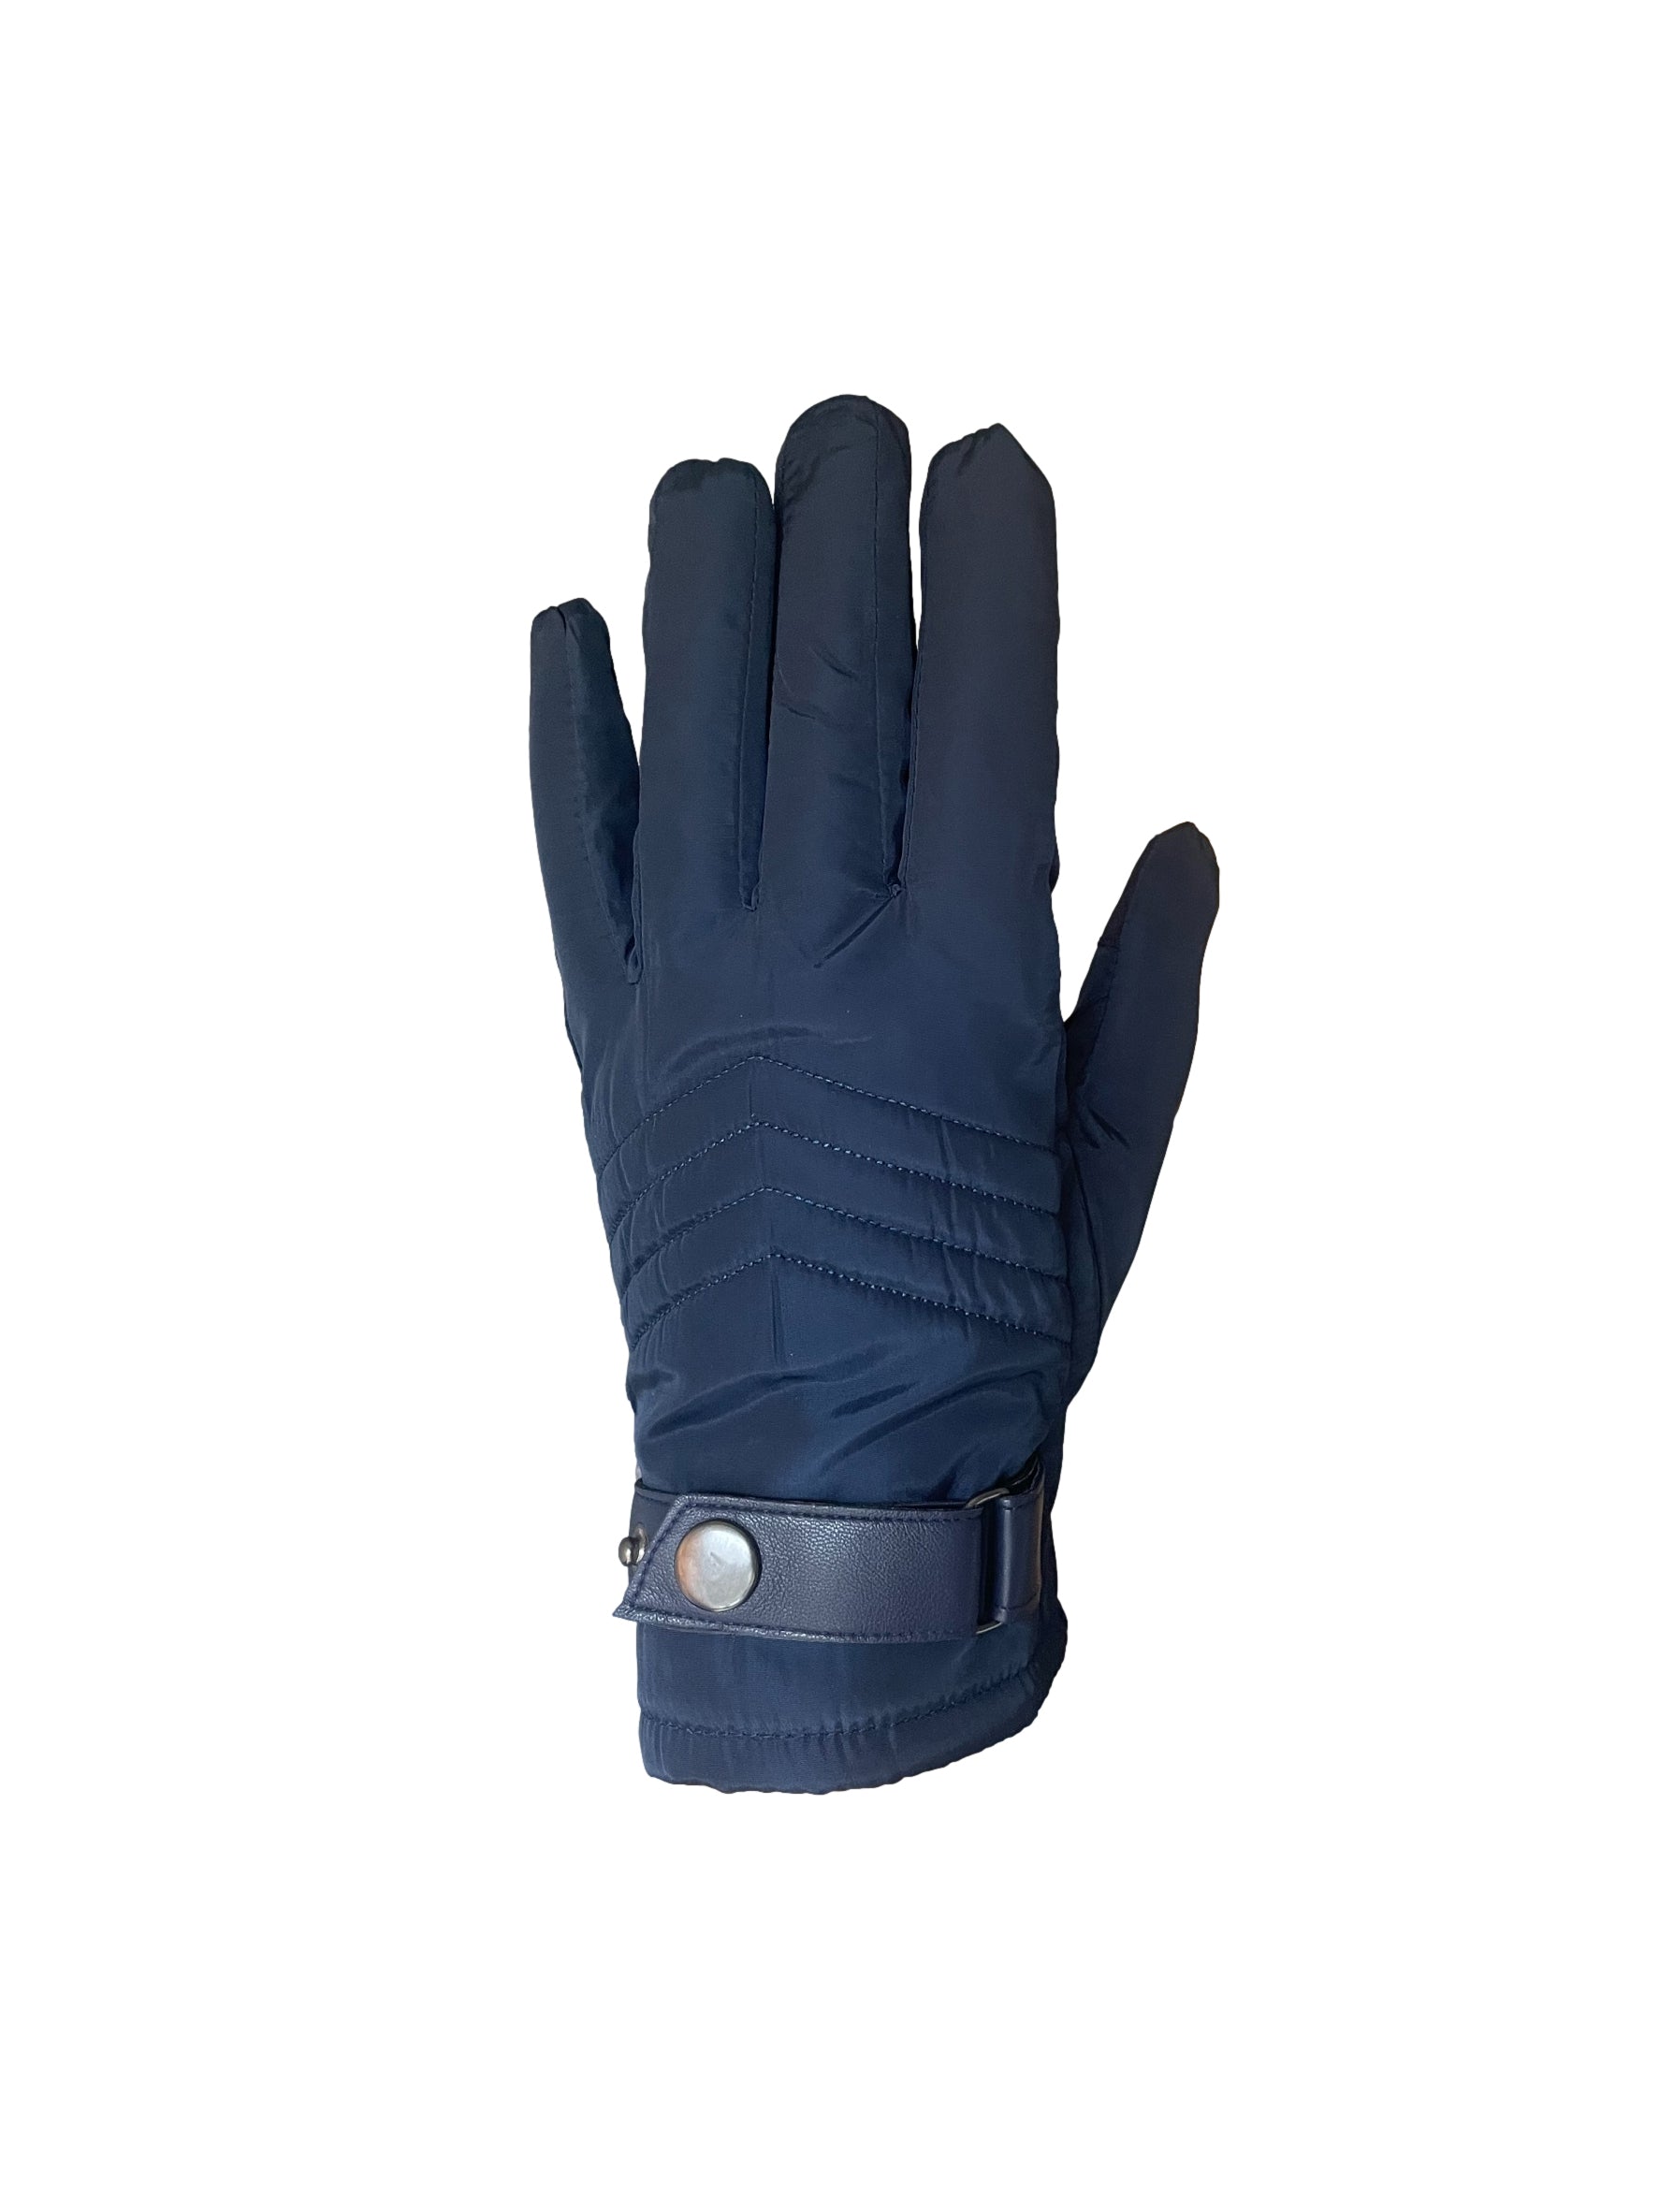 Nylon Glove Quilted Back Polyester Lined With Adjustable Strap